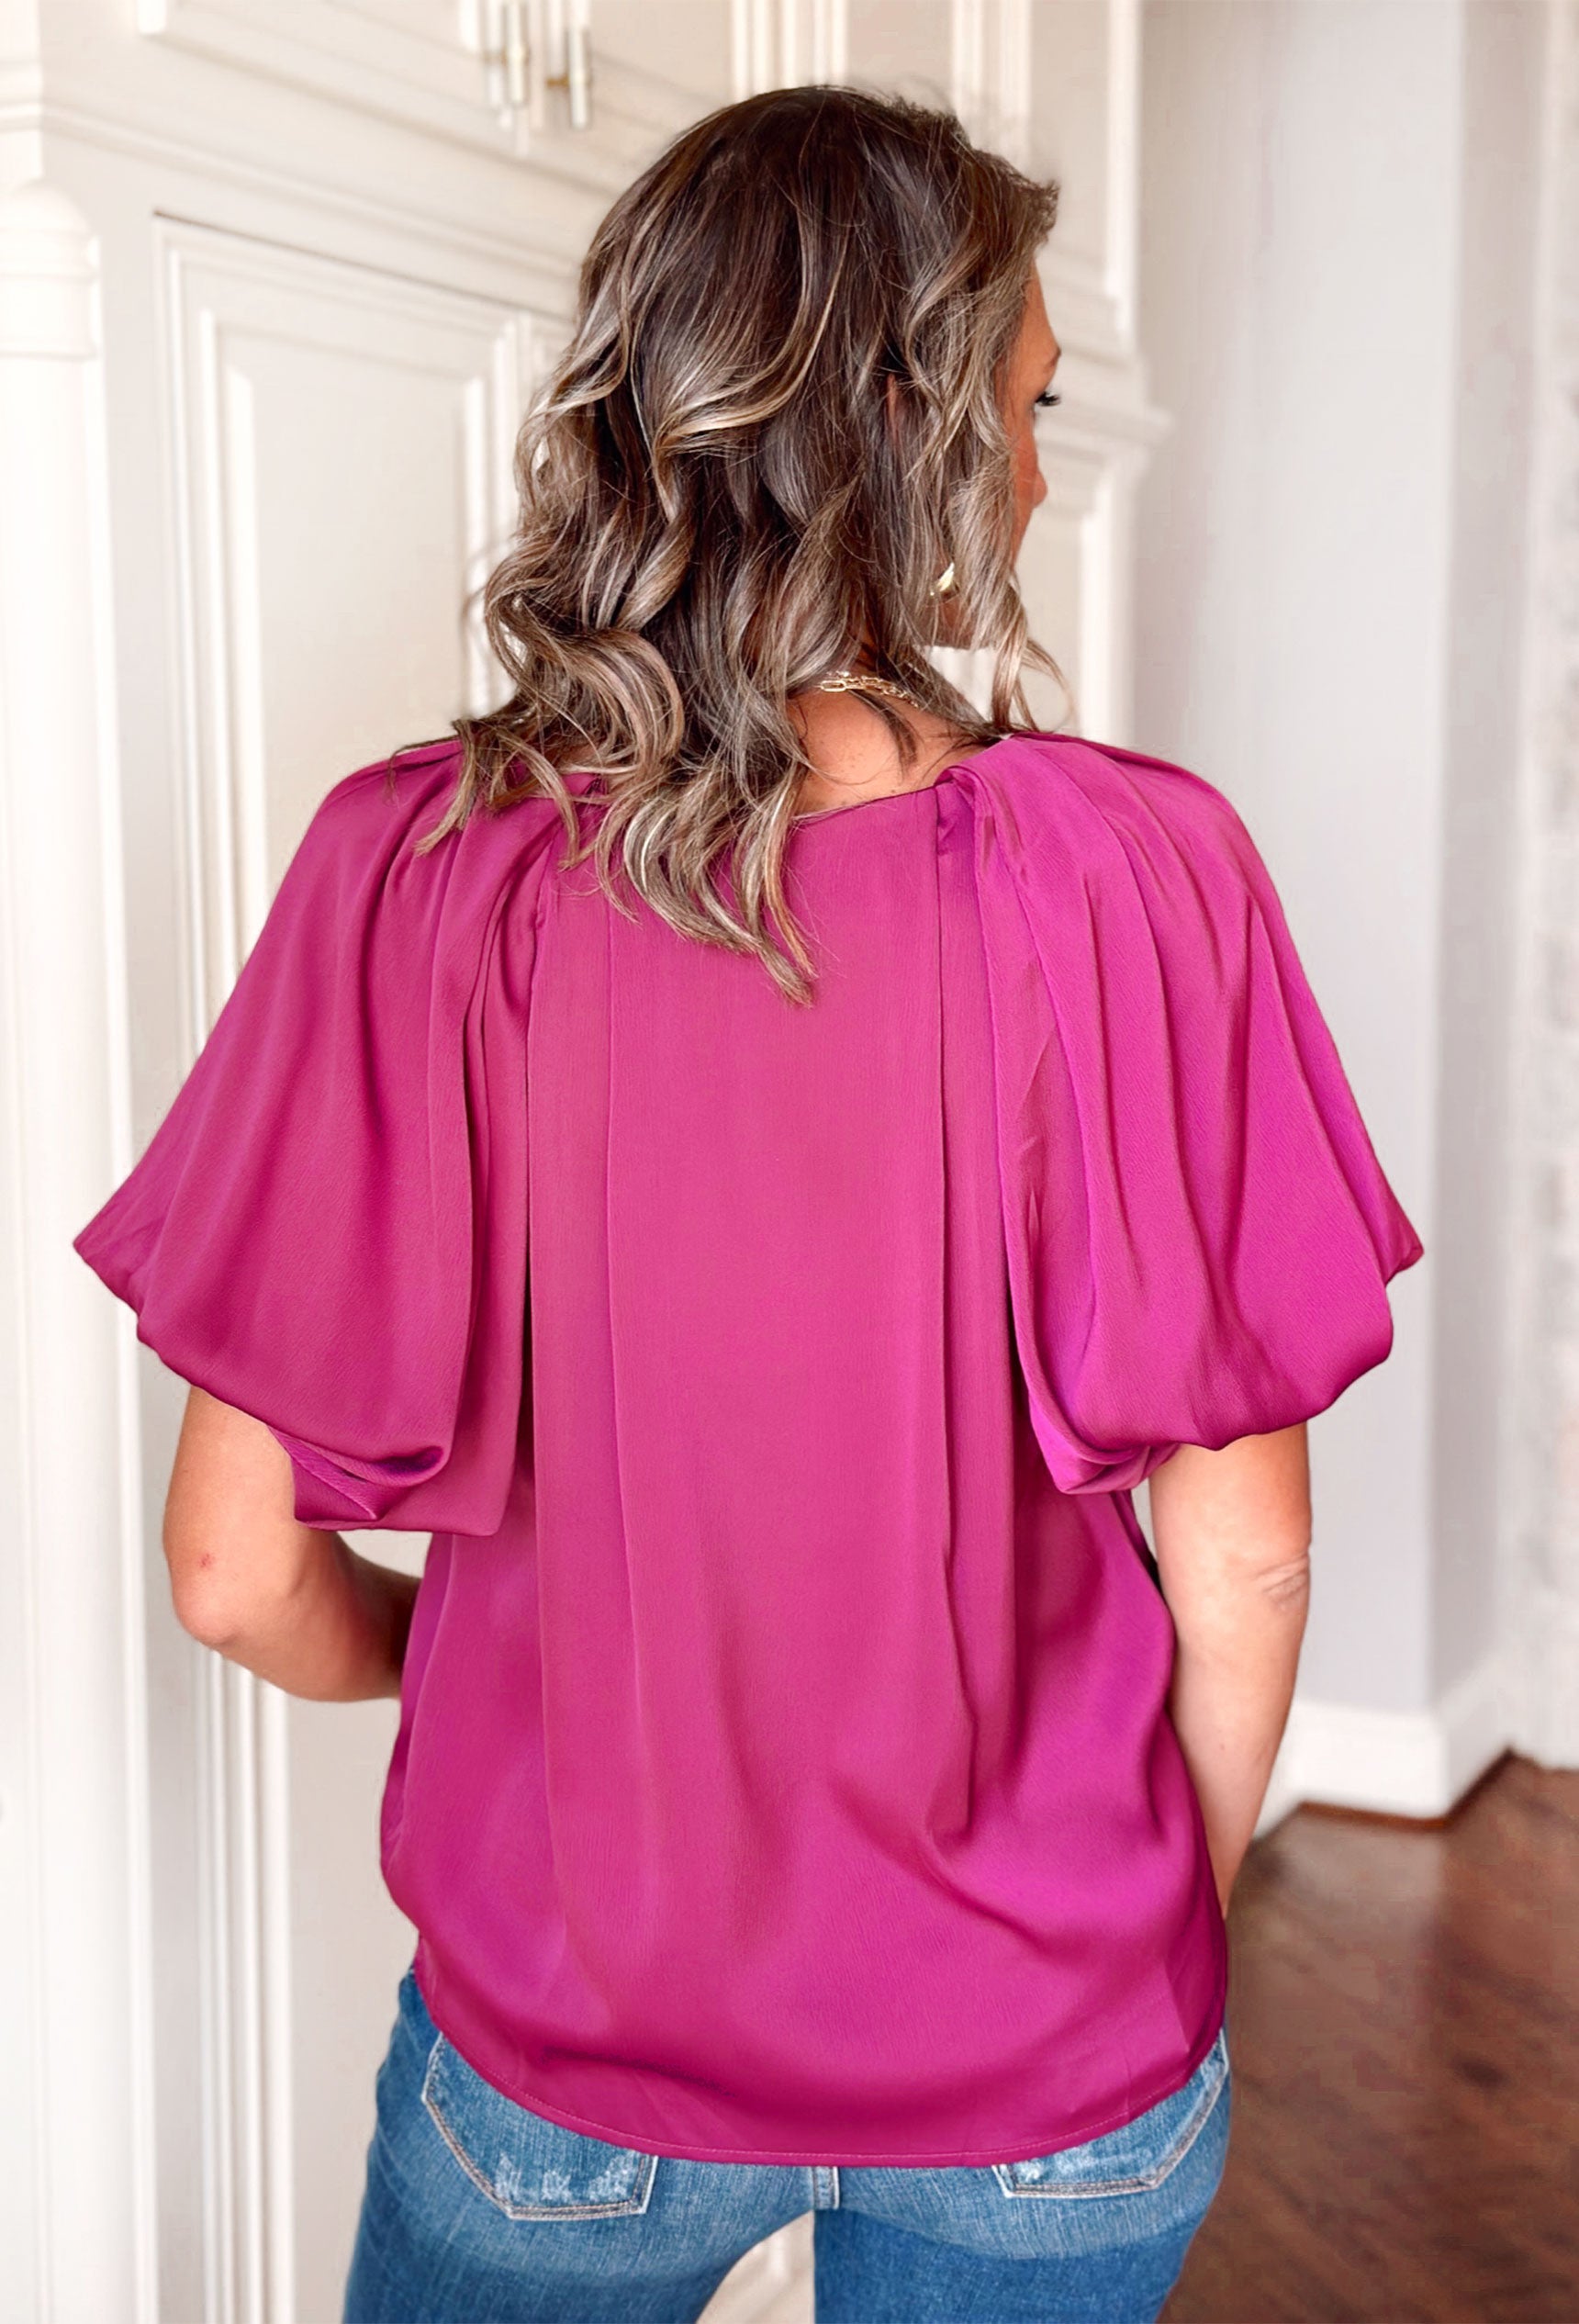 Dixie Blouse in Plum, fuchsia blouse with puff sleeves and soft v-neck